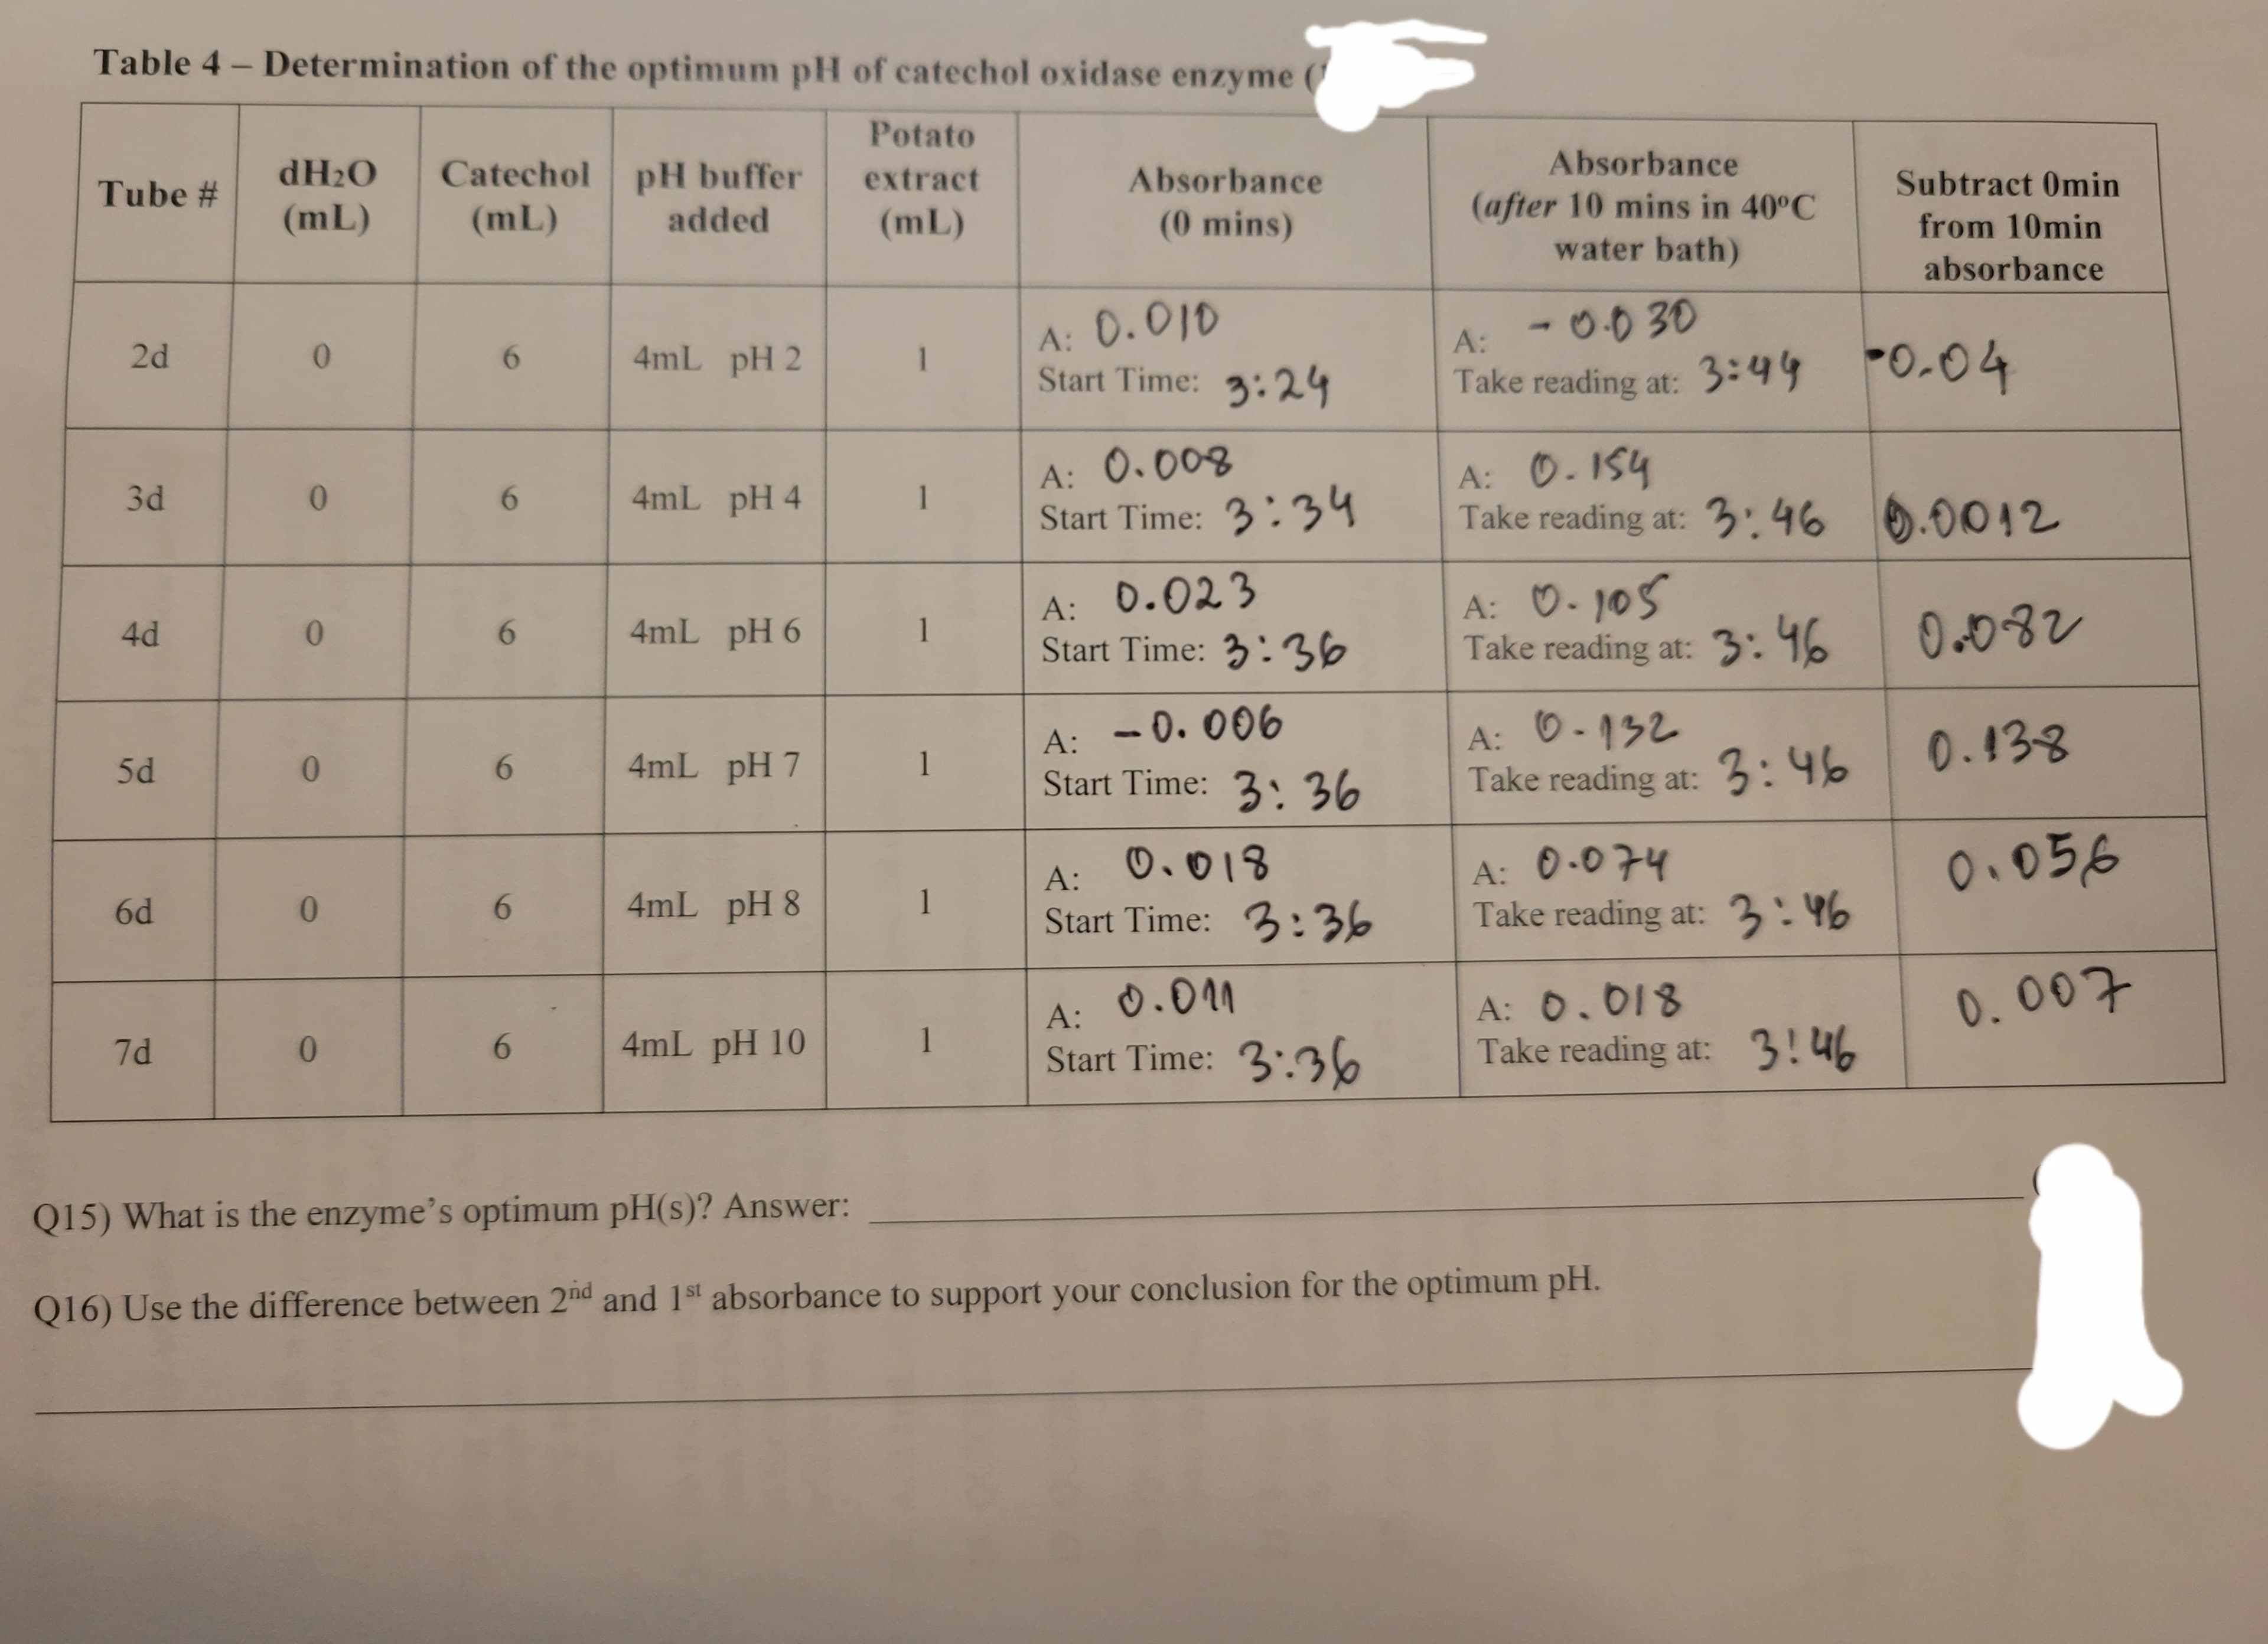 Table 4- Determination of the optimum pH of catechol oxidase enzyme
Potato
extract
(mL)
Tube #
2d
3d
4d
5d
6d
7d
dH₂O
(mL)
0
0
0
0
0
0
Catechol
(mL)
6
6
6
6
6
6
pH buffer
added
4mL pH 2
4mL pH 4
4mL pH 6
4mL pH 7
4mL pH 8
4mL pH 10
1
1
1
1
1
1
Absorbance
(0 mins)
A: 0.010
Start Time: 3:24
A: 0.008
Start Time: 3:34
A: 0.023
Start Time: 3:36
A:
-0.006
Start Time: 3:36
0.018
A:
Start Time: 3:36
A:
0.011
Start Time: 3:36
Absorbance
(after 10 mins in 40°C
water bath)
-0.030
A:
Take reading at: 3:44
A: 0.154
Take reading at: 3:46
A: 0-105
Take reading at: 3:46
A:
0-132
Take reading at: 3:46
A: 0.074
Take reading at: 3:46
A: 0.018
Take reading at: 3!46
Q15) What is the enzyme's optimum pH(s)? Answer:
Q16) Use the difference between 2nd and 1st absorbance to support your conclusion for the optimum pH.
Subtract Omin
from 10min
absorbance
-0.04
0.0012
0.082
0.138
0.056
0.007